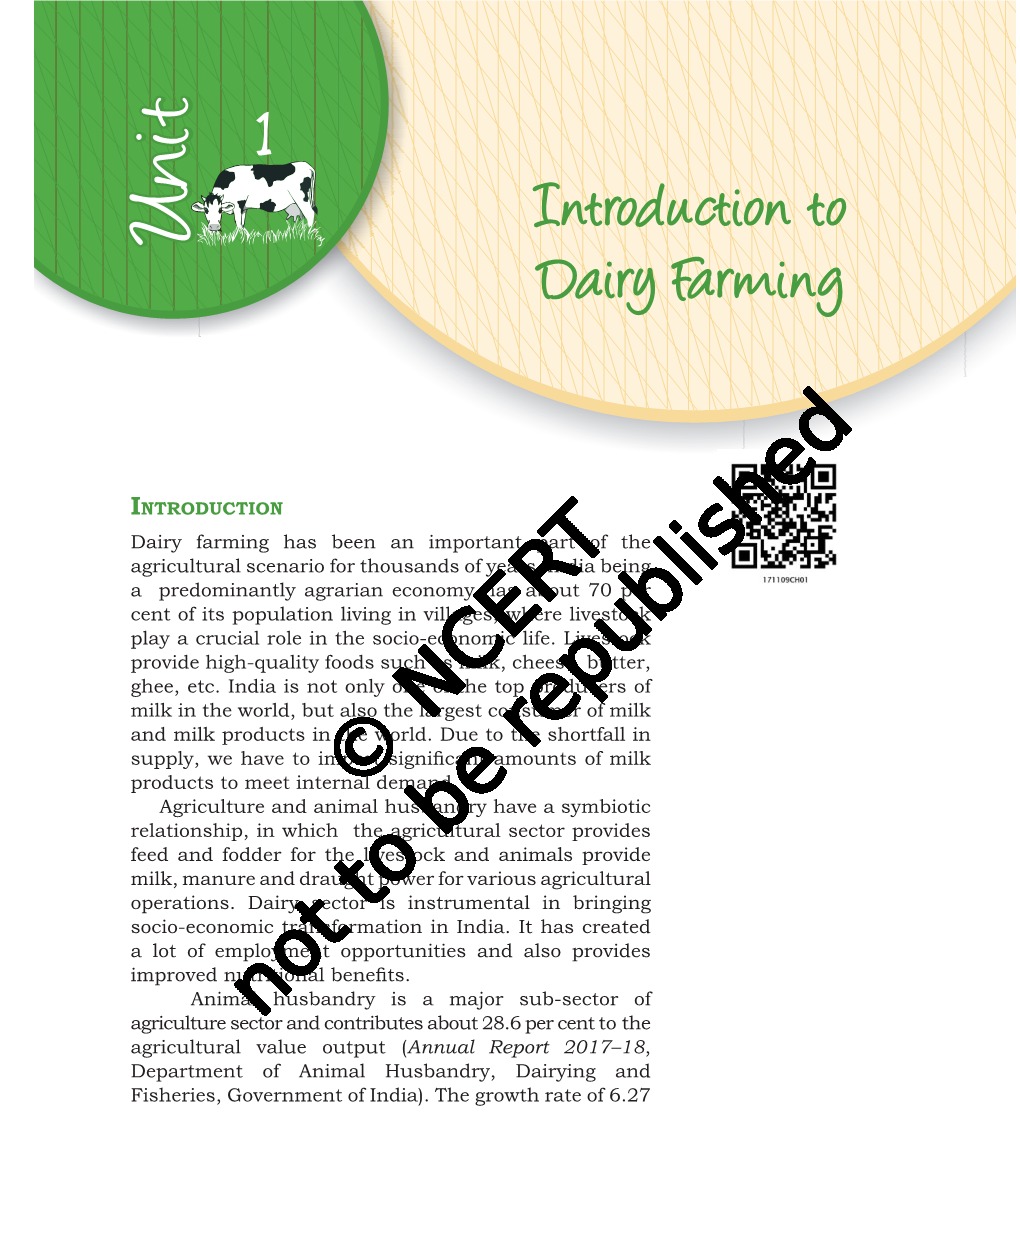 Introduction to Dairy Farming